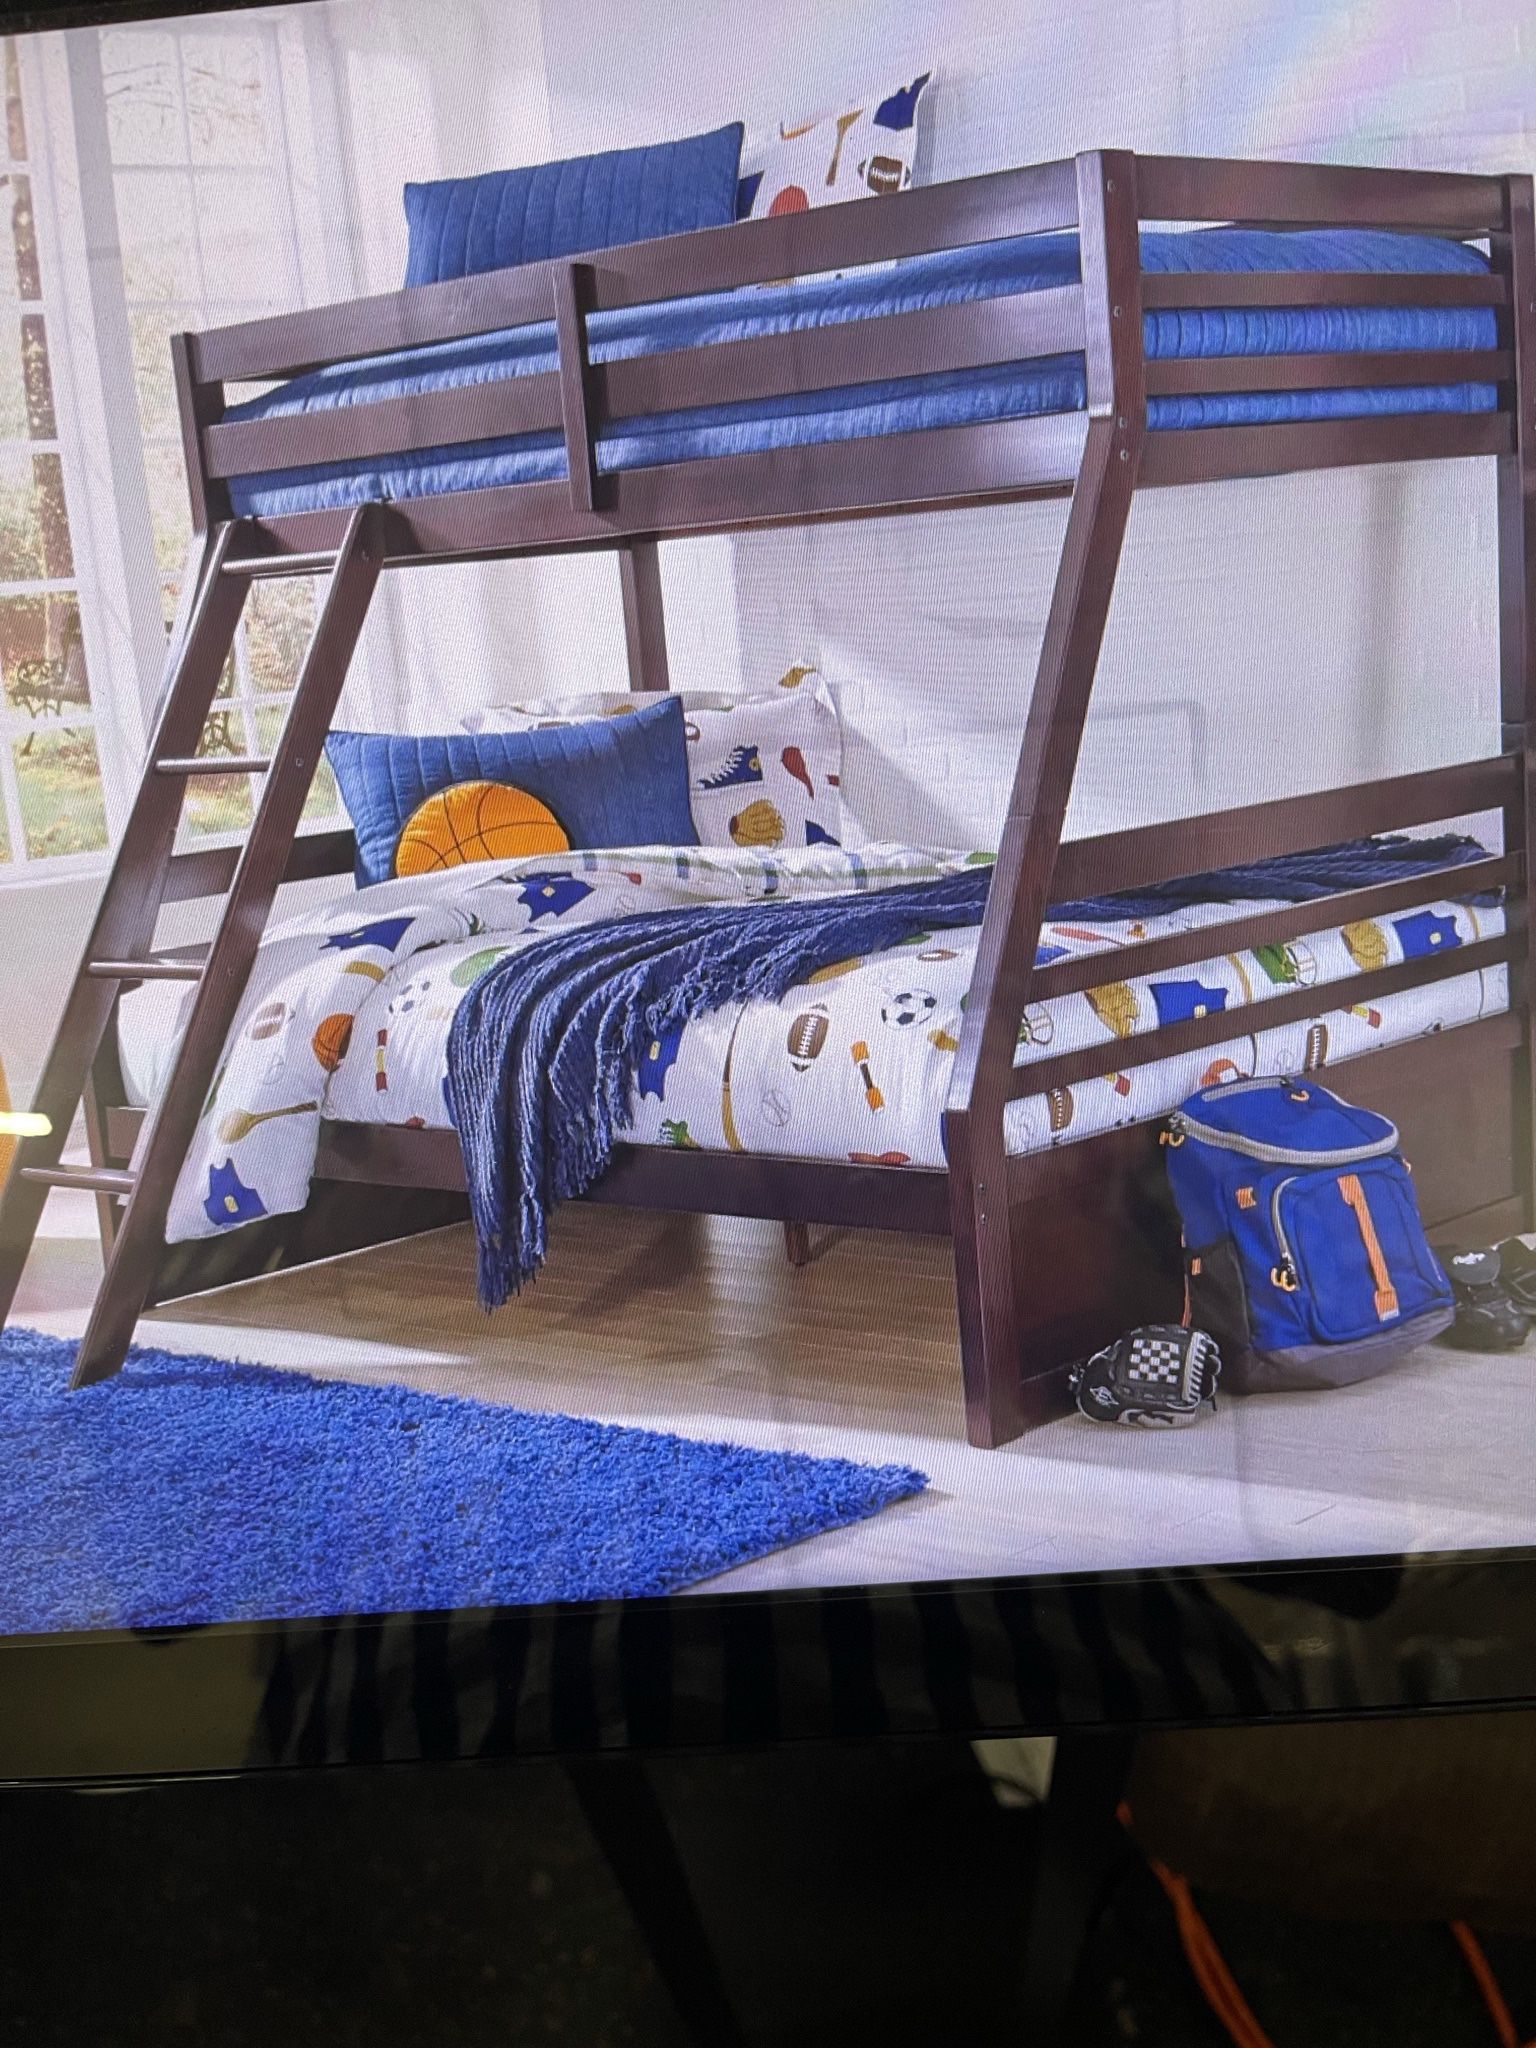 Twin Over Full Bunk Bed On Sale